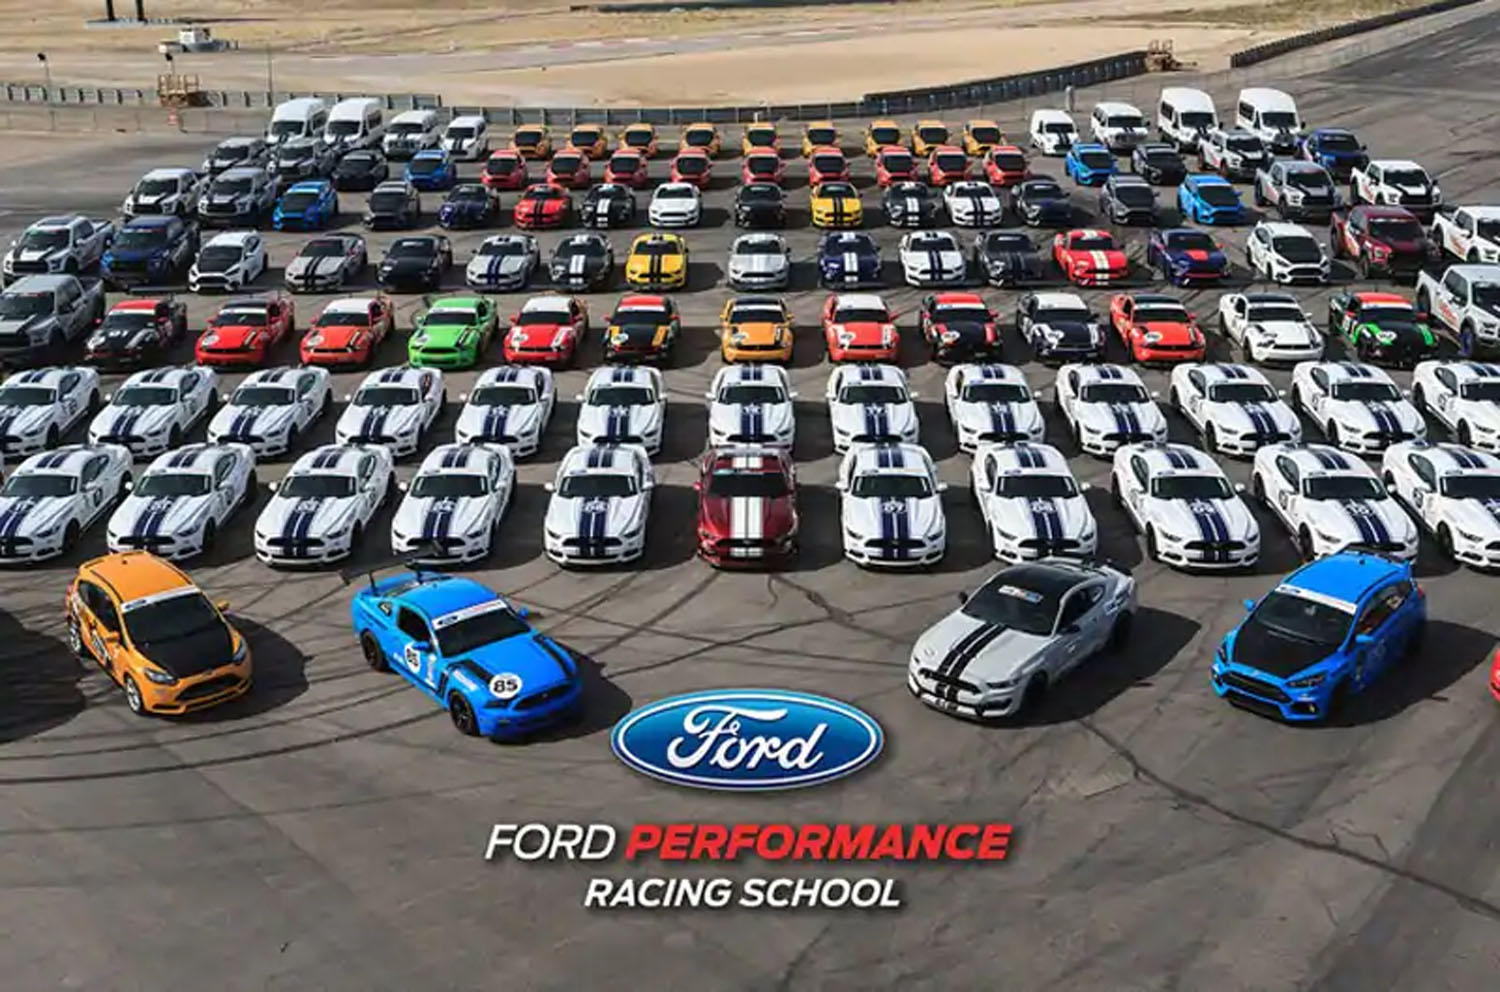 Ford Performance Racing School 2022 Dates Have Opened Up